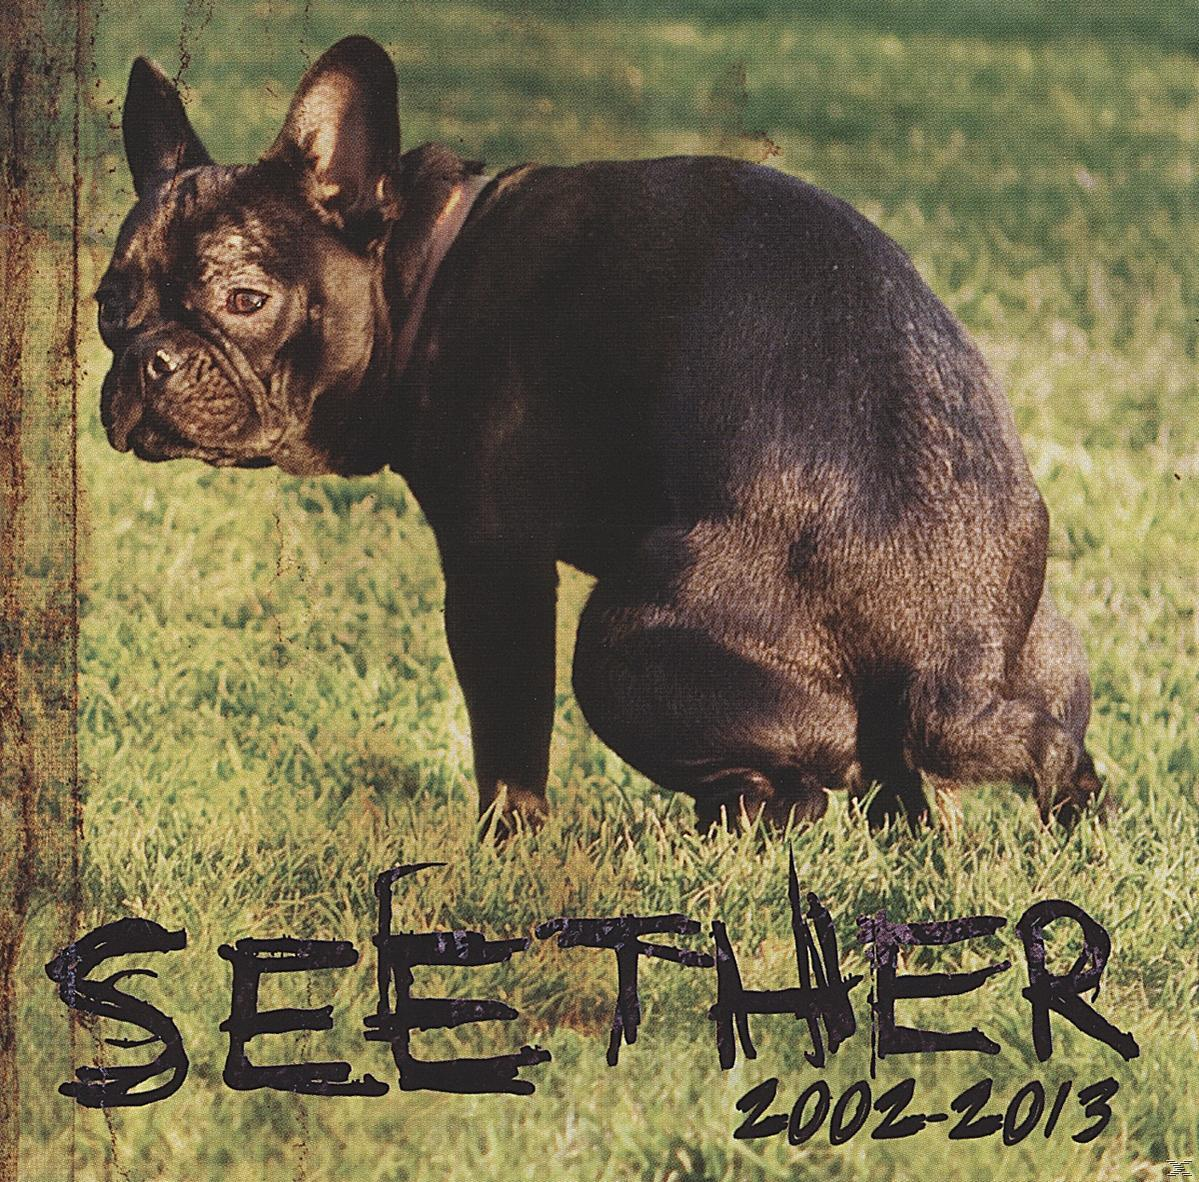 (CD) - - Seether 2002-2013 Seether